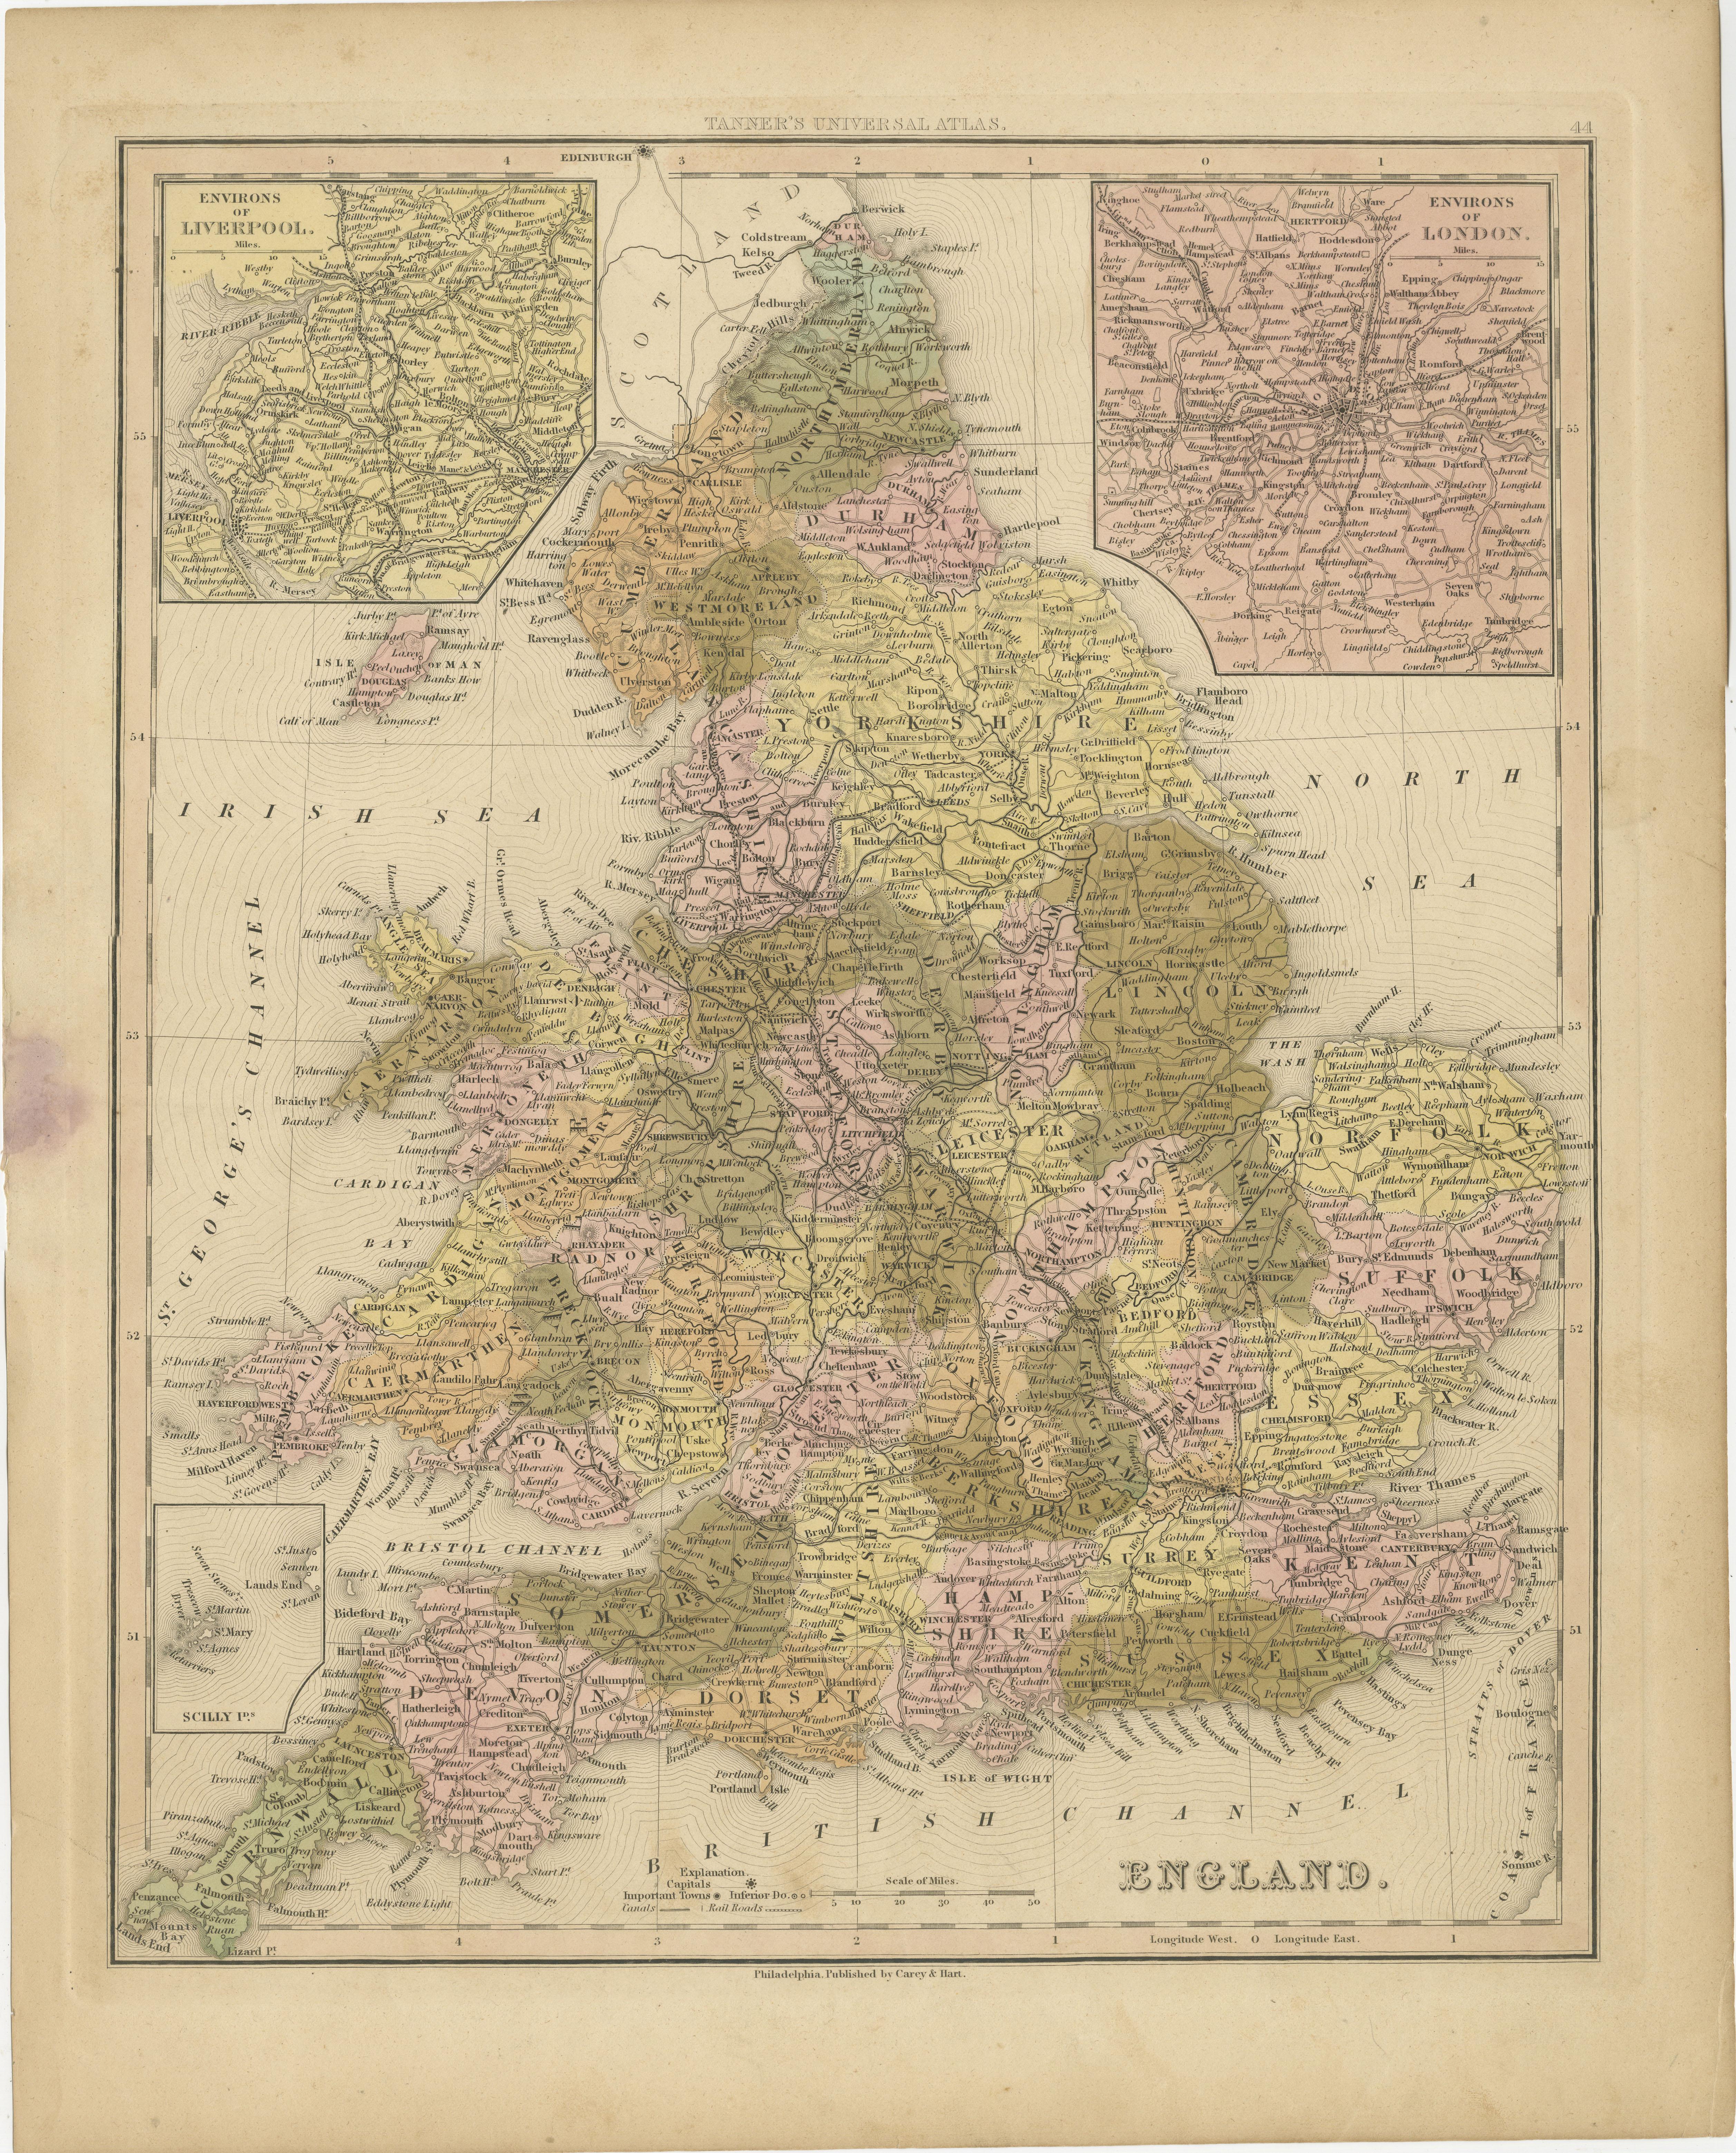 Antique map titled 'England'. Original antique map of England, with two inset maps of the region of Liverpool and London. This map originates from Tanner's 'Universal Atlas'. Published by Carey & Hart, 1842.